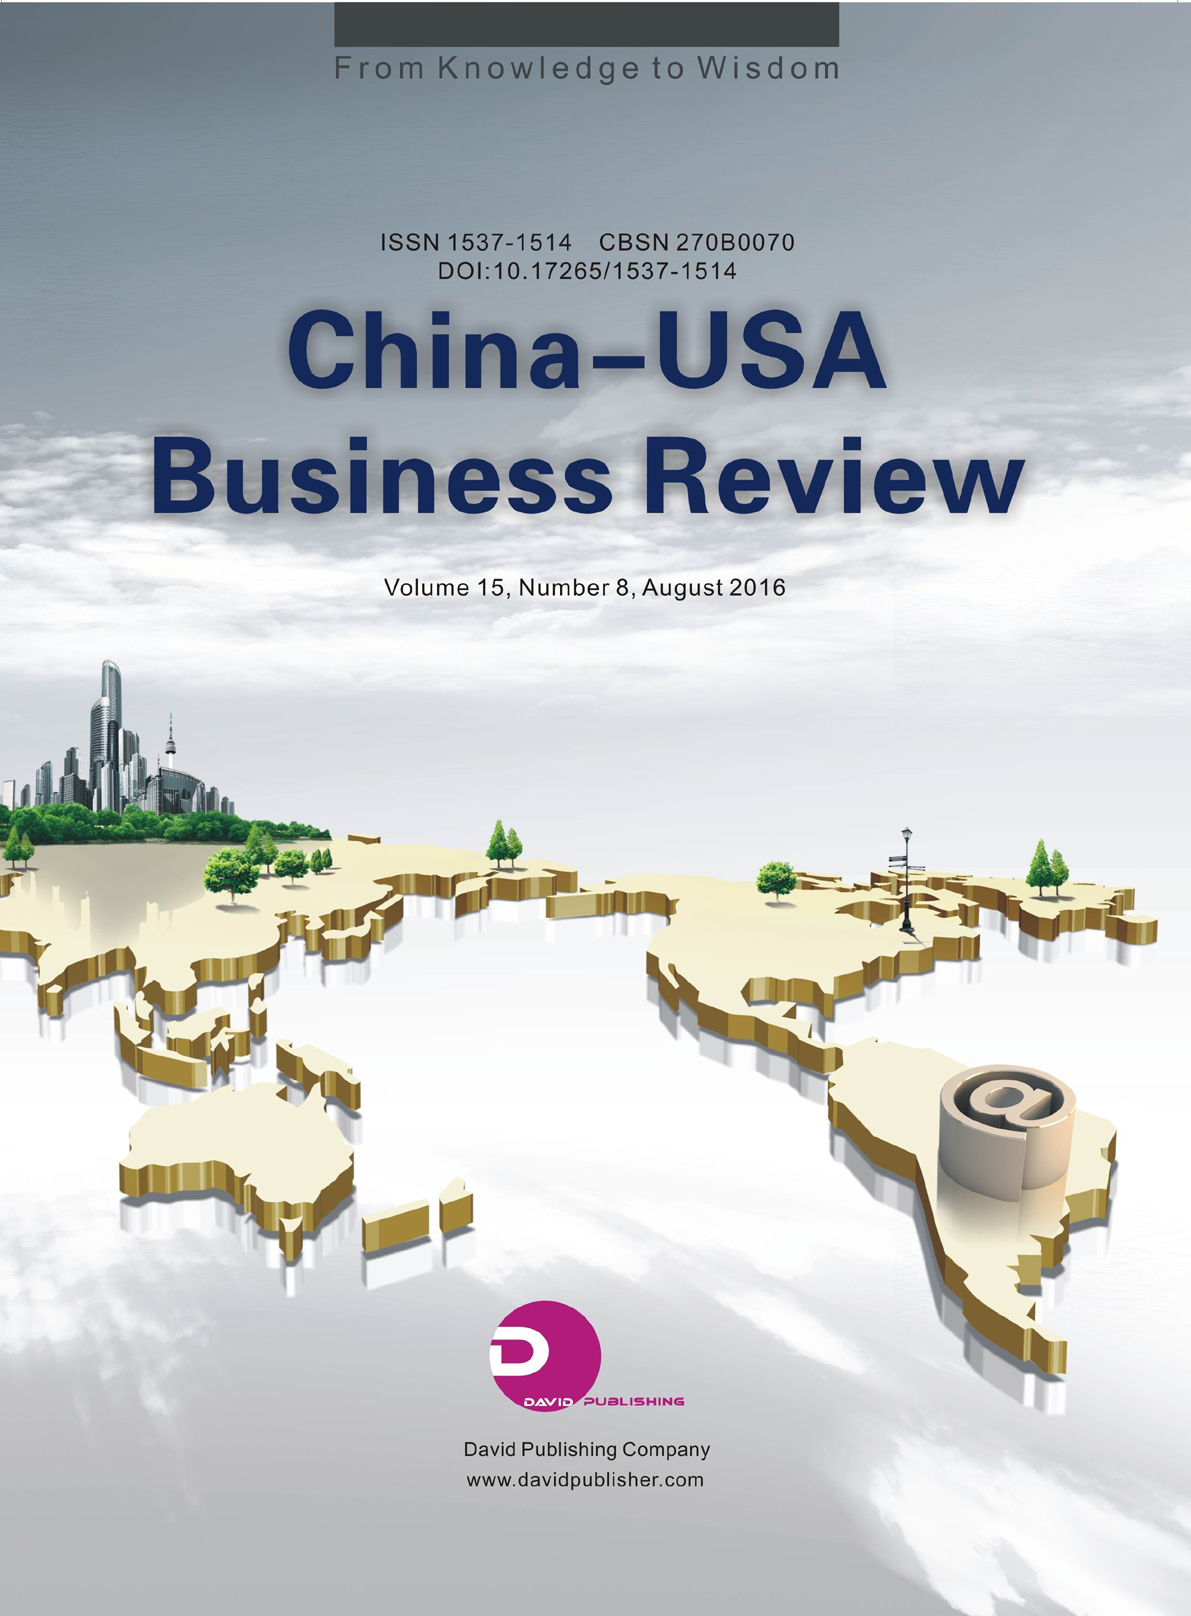 China-USA Business Review